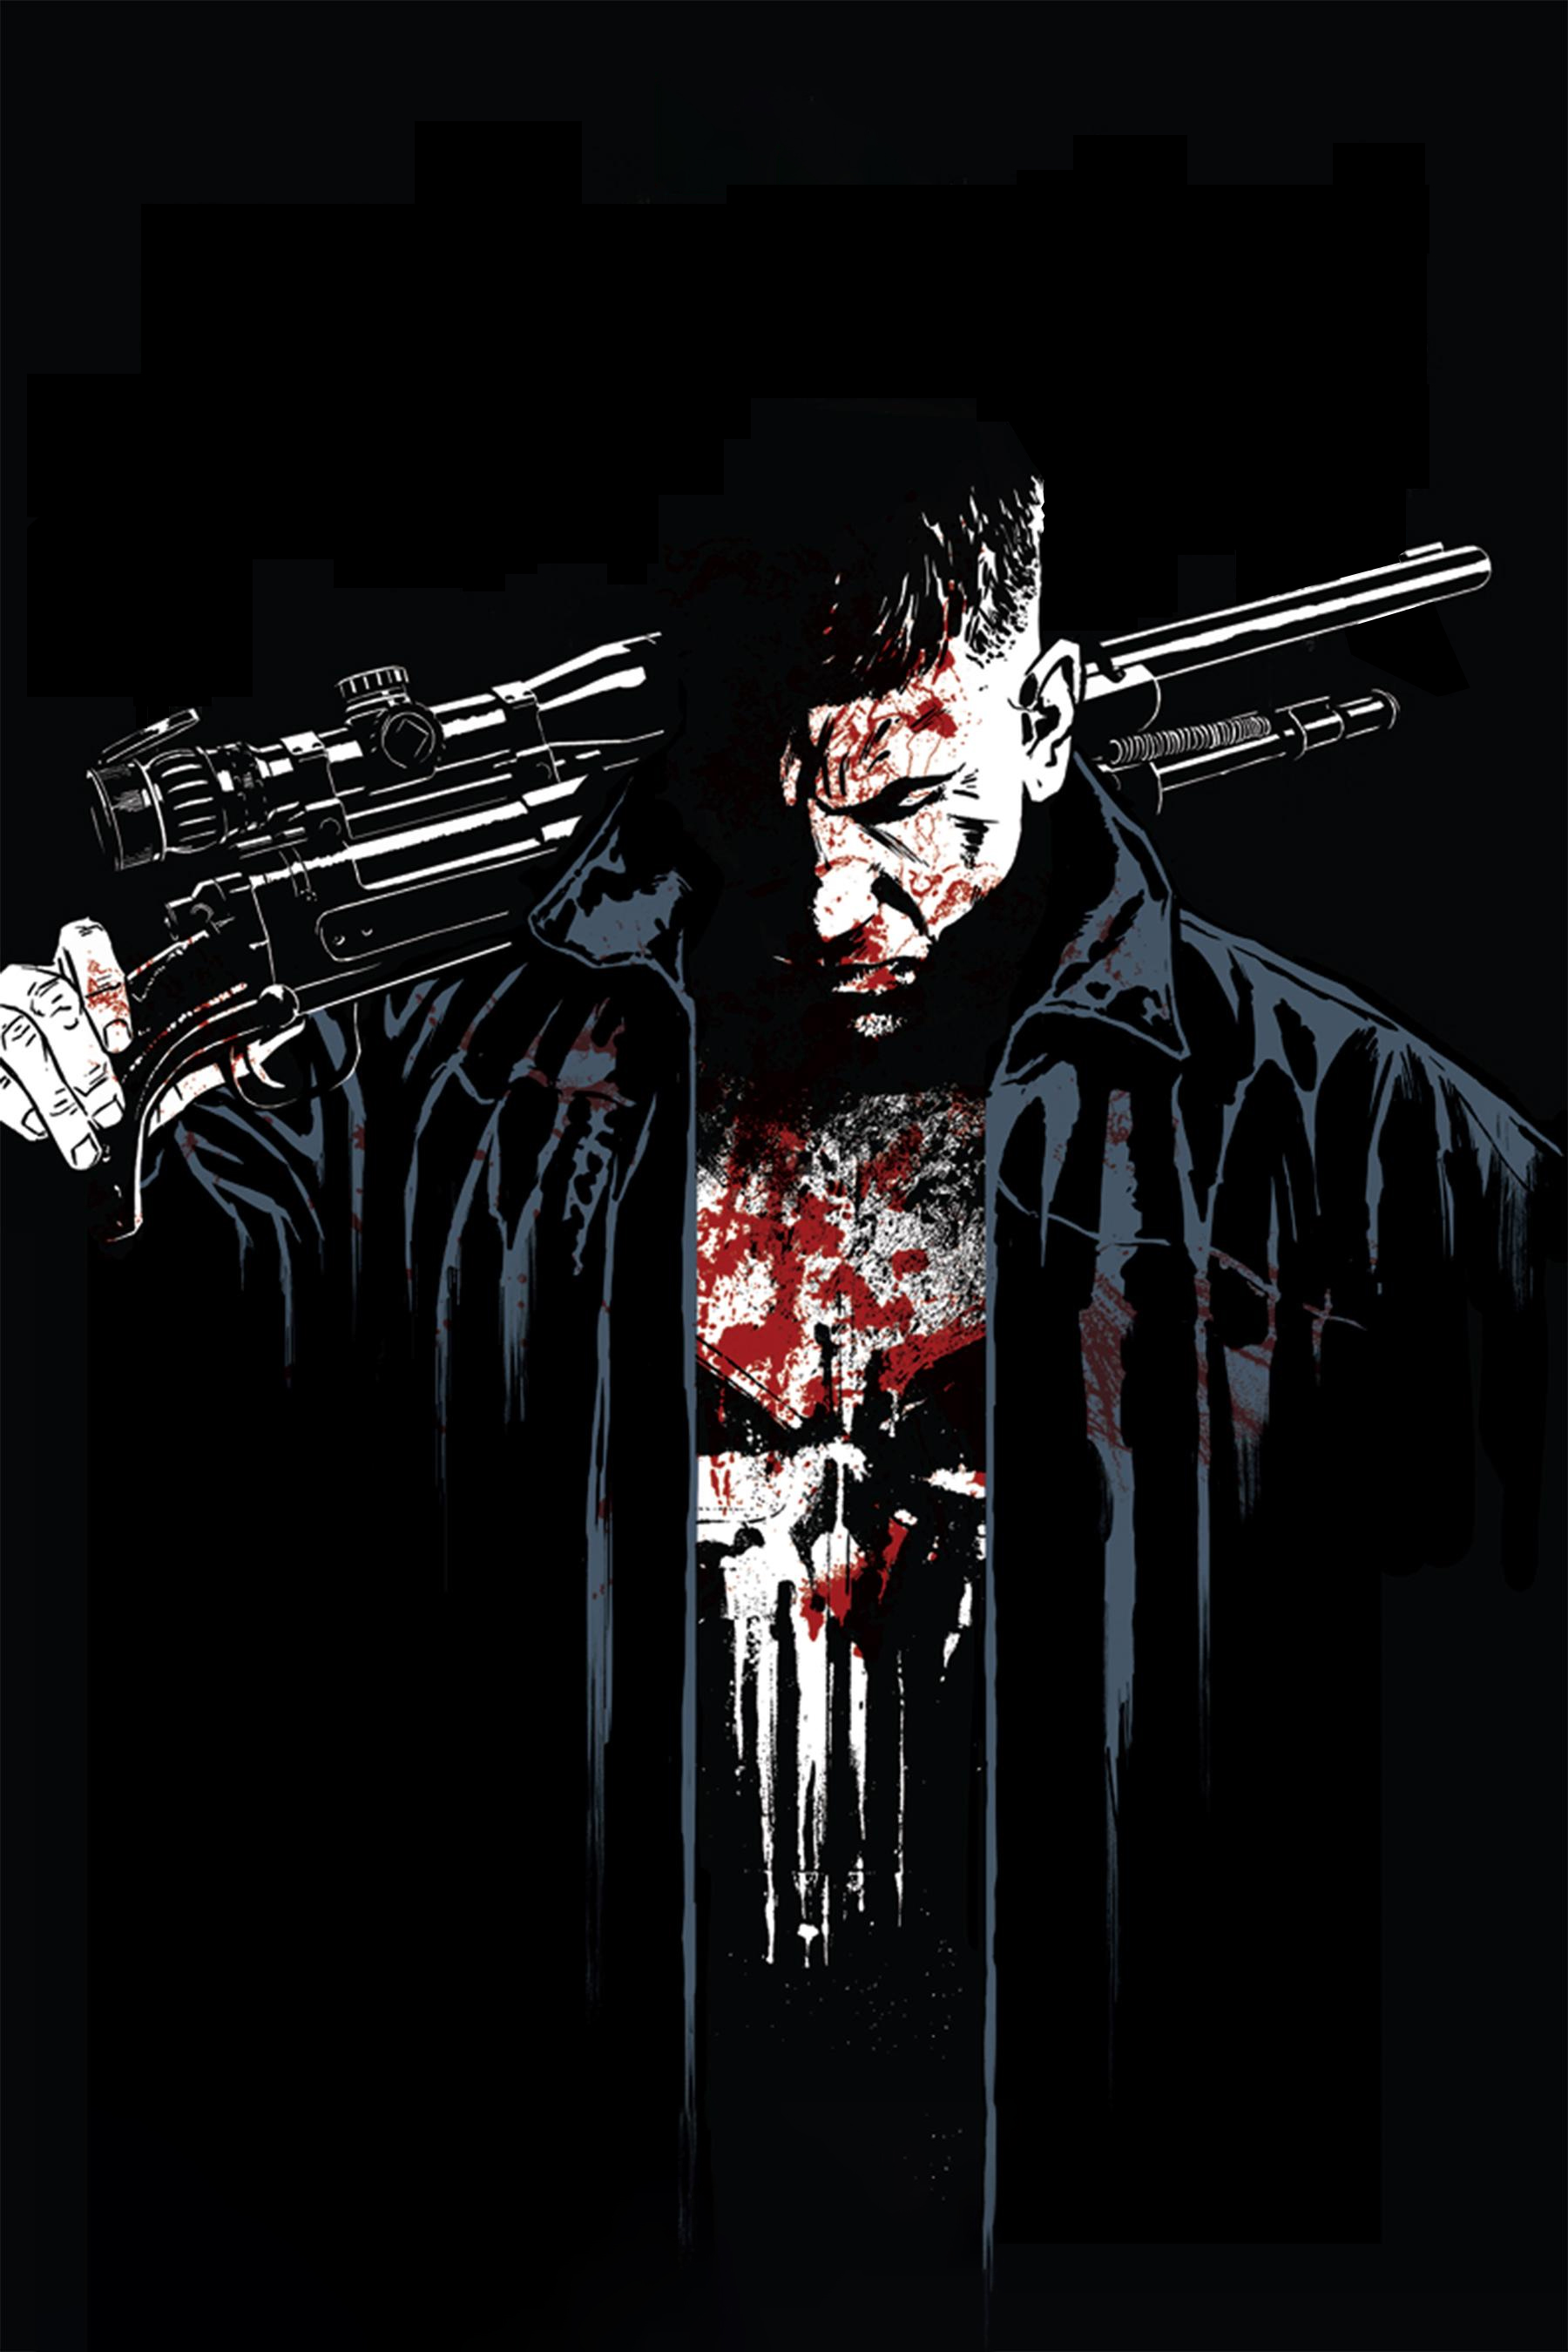 the punisher wallpaper,darkness,t shirt,graphic design,fictional character,illustration